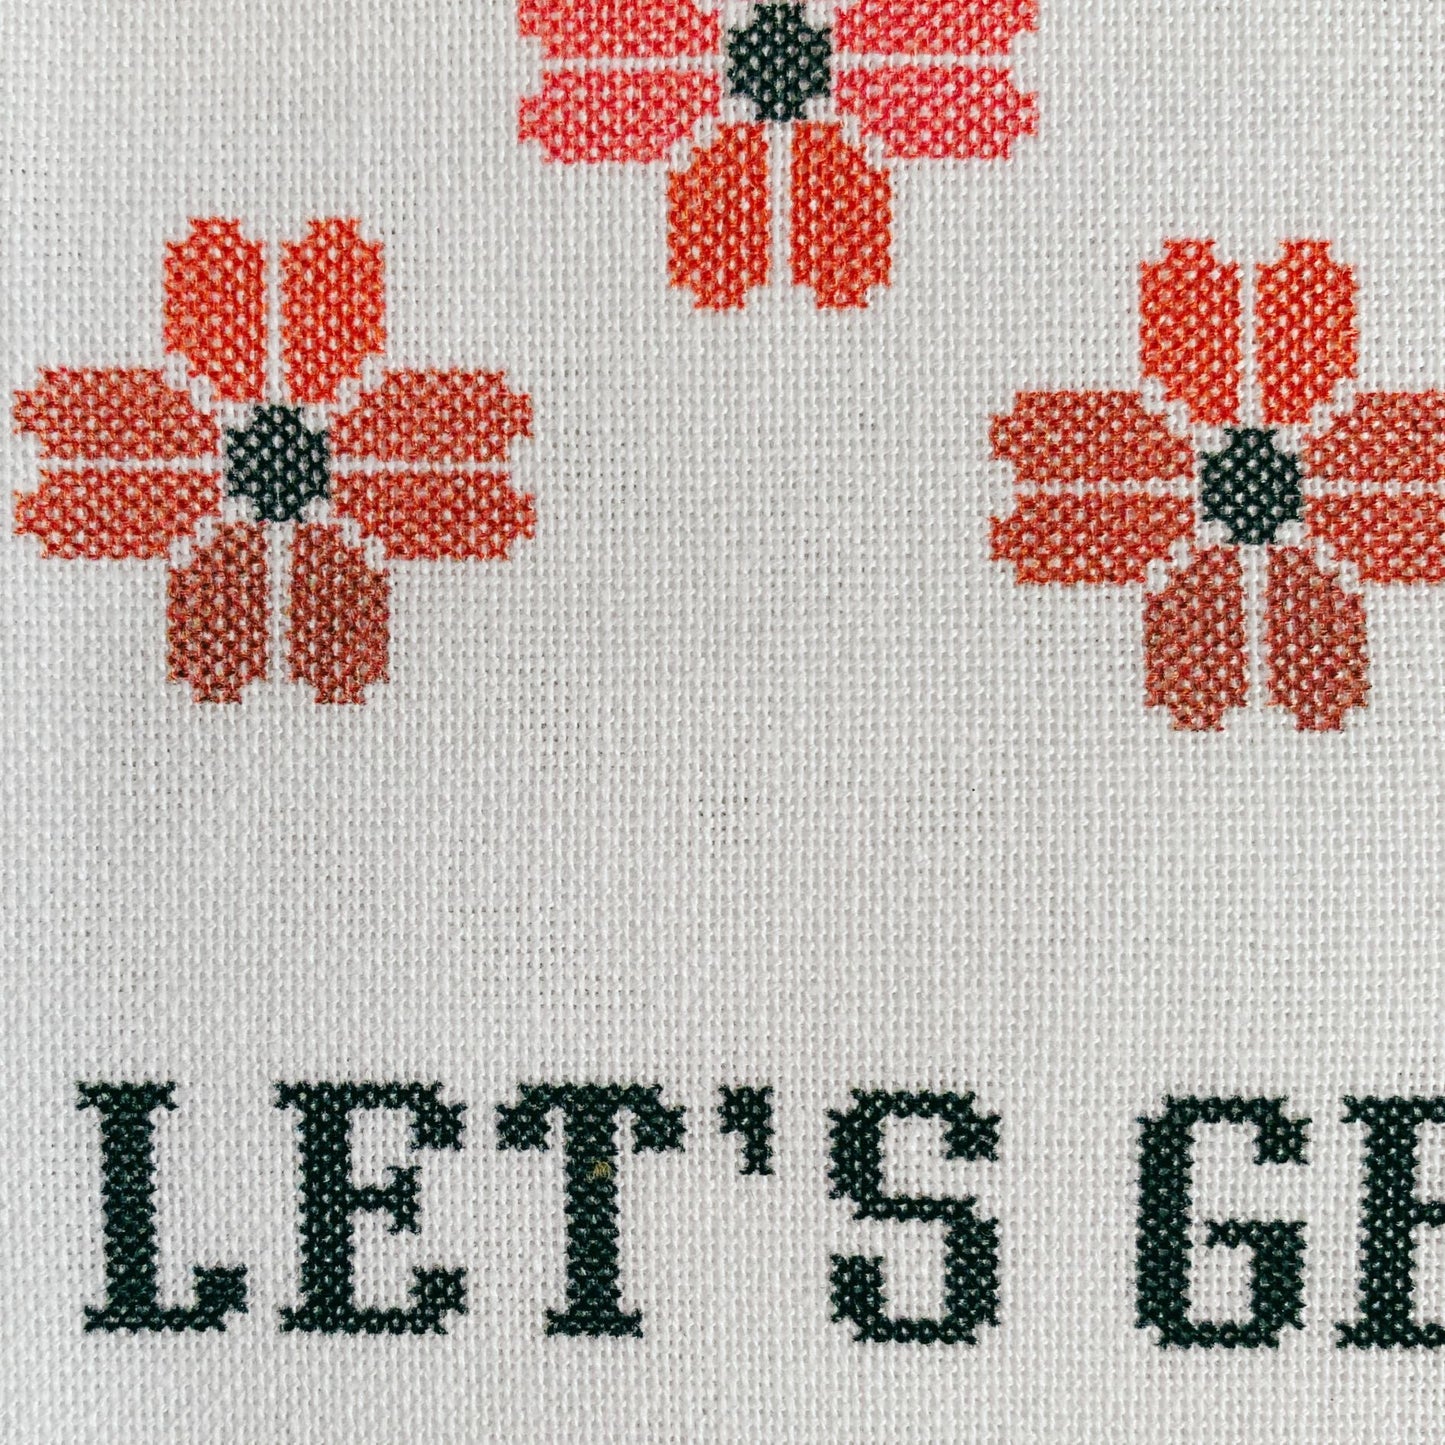 Let's Get All Freaky and Shit Cross-Stitch Print Dishtowel | Hangable Rude Funny Saying Cotton Towel